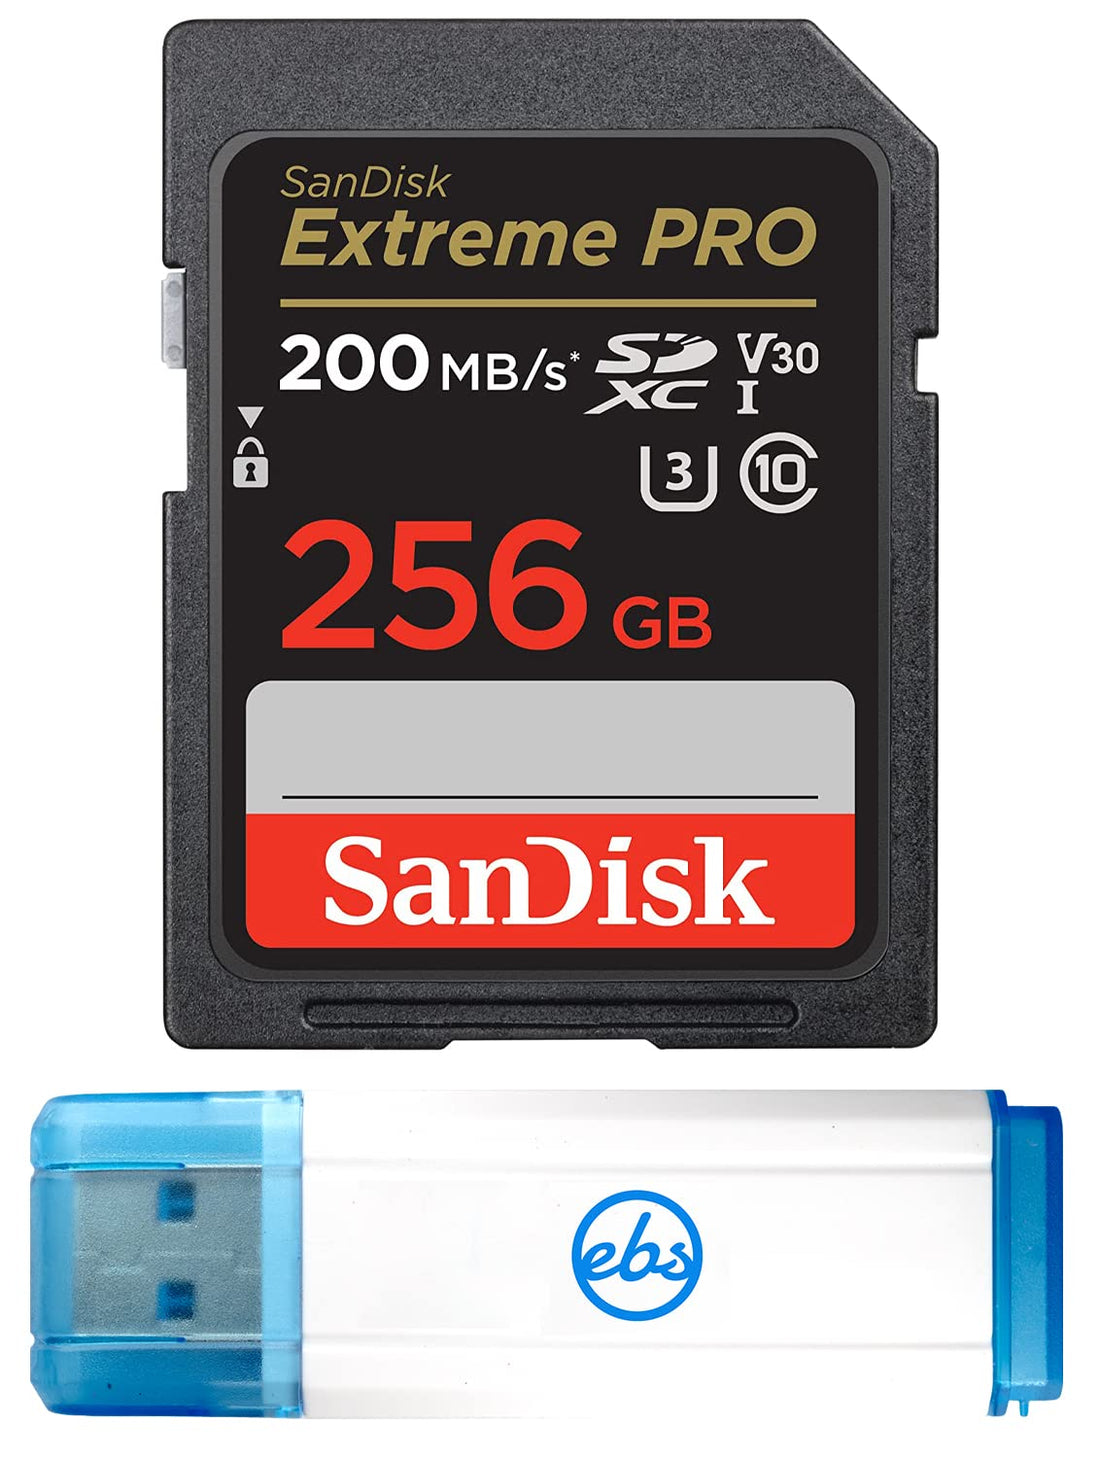 SanDisk Extreme Pro 256GB SD Card Works with Nikon Z50, Z5 Mirroless, D780 Camera (SDSDXXY-256G-GN4IN) Class 10 V30 U3 Bundle with (1) Everything But Stromboli 3.0 Micro & SD Card Reader